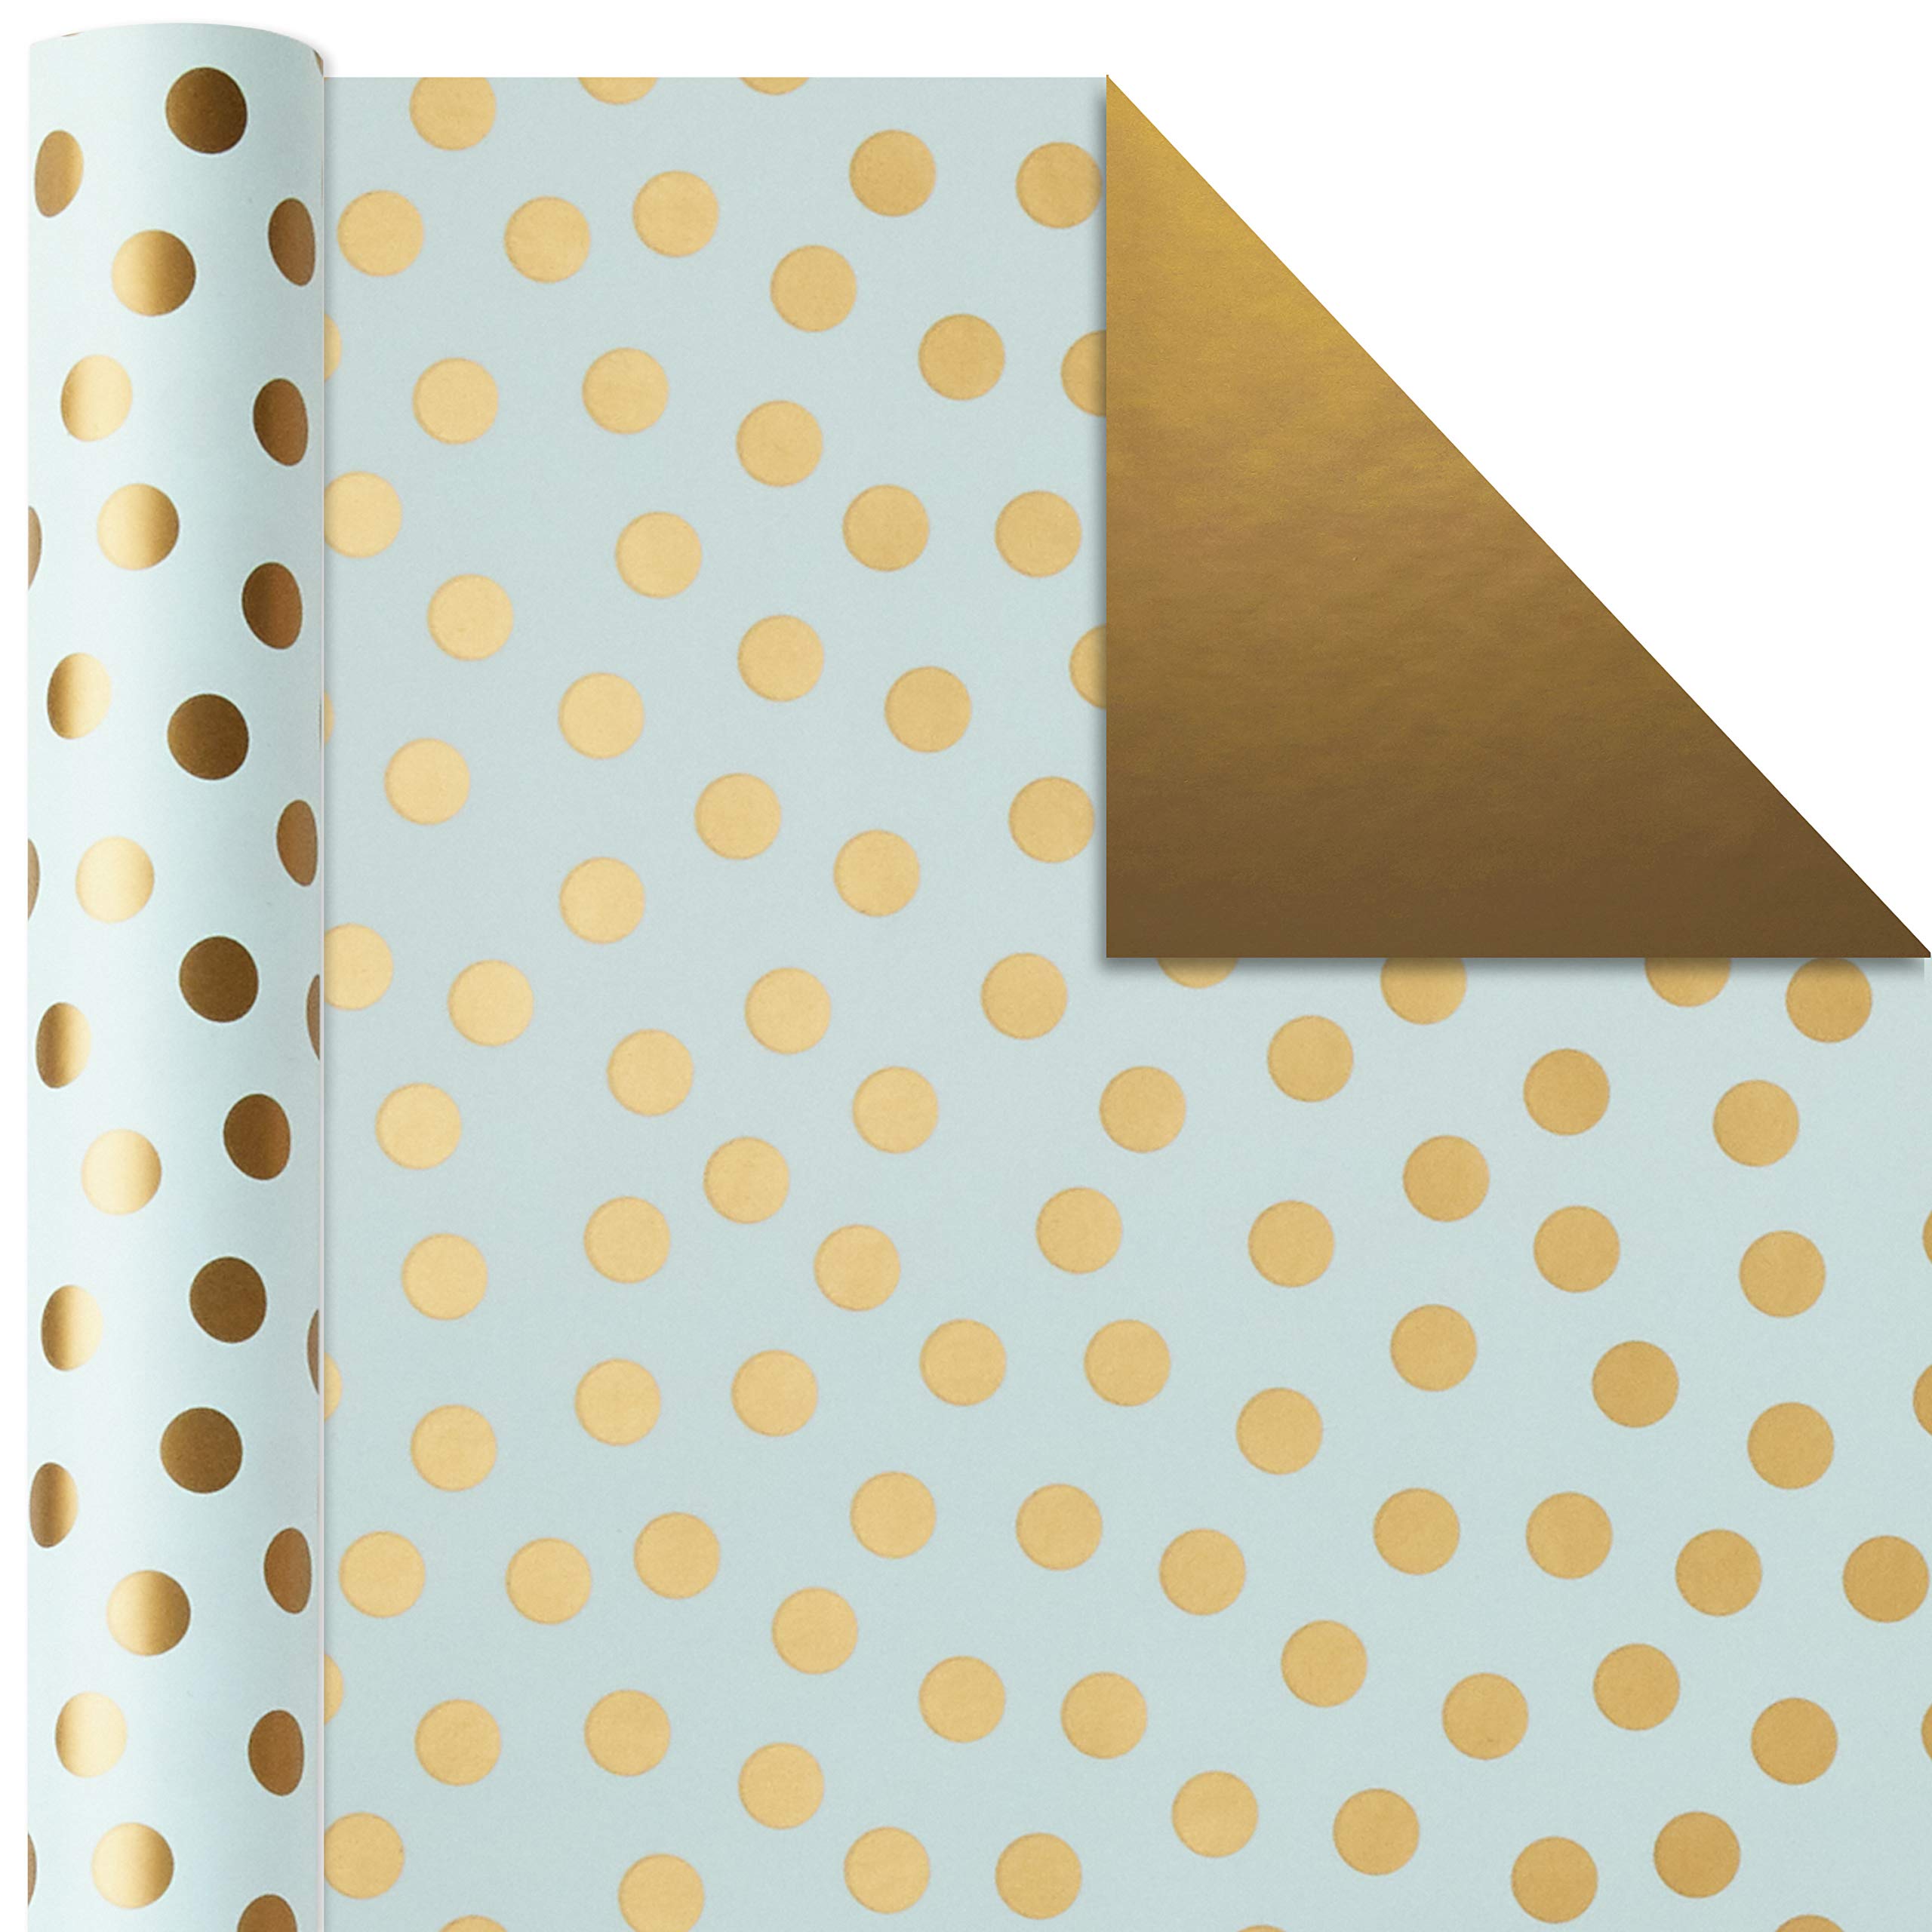 Hallmark All Occasion Reversible Wrapping Paper (Modern Metallics, Pack of 3, 120 sq. ft. ttl.) for Birthdays, Bridal Showers, Baby Showers, Christmas, Friendsmas and More